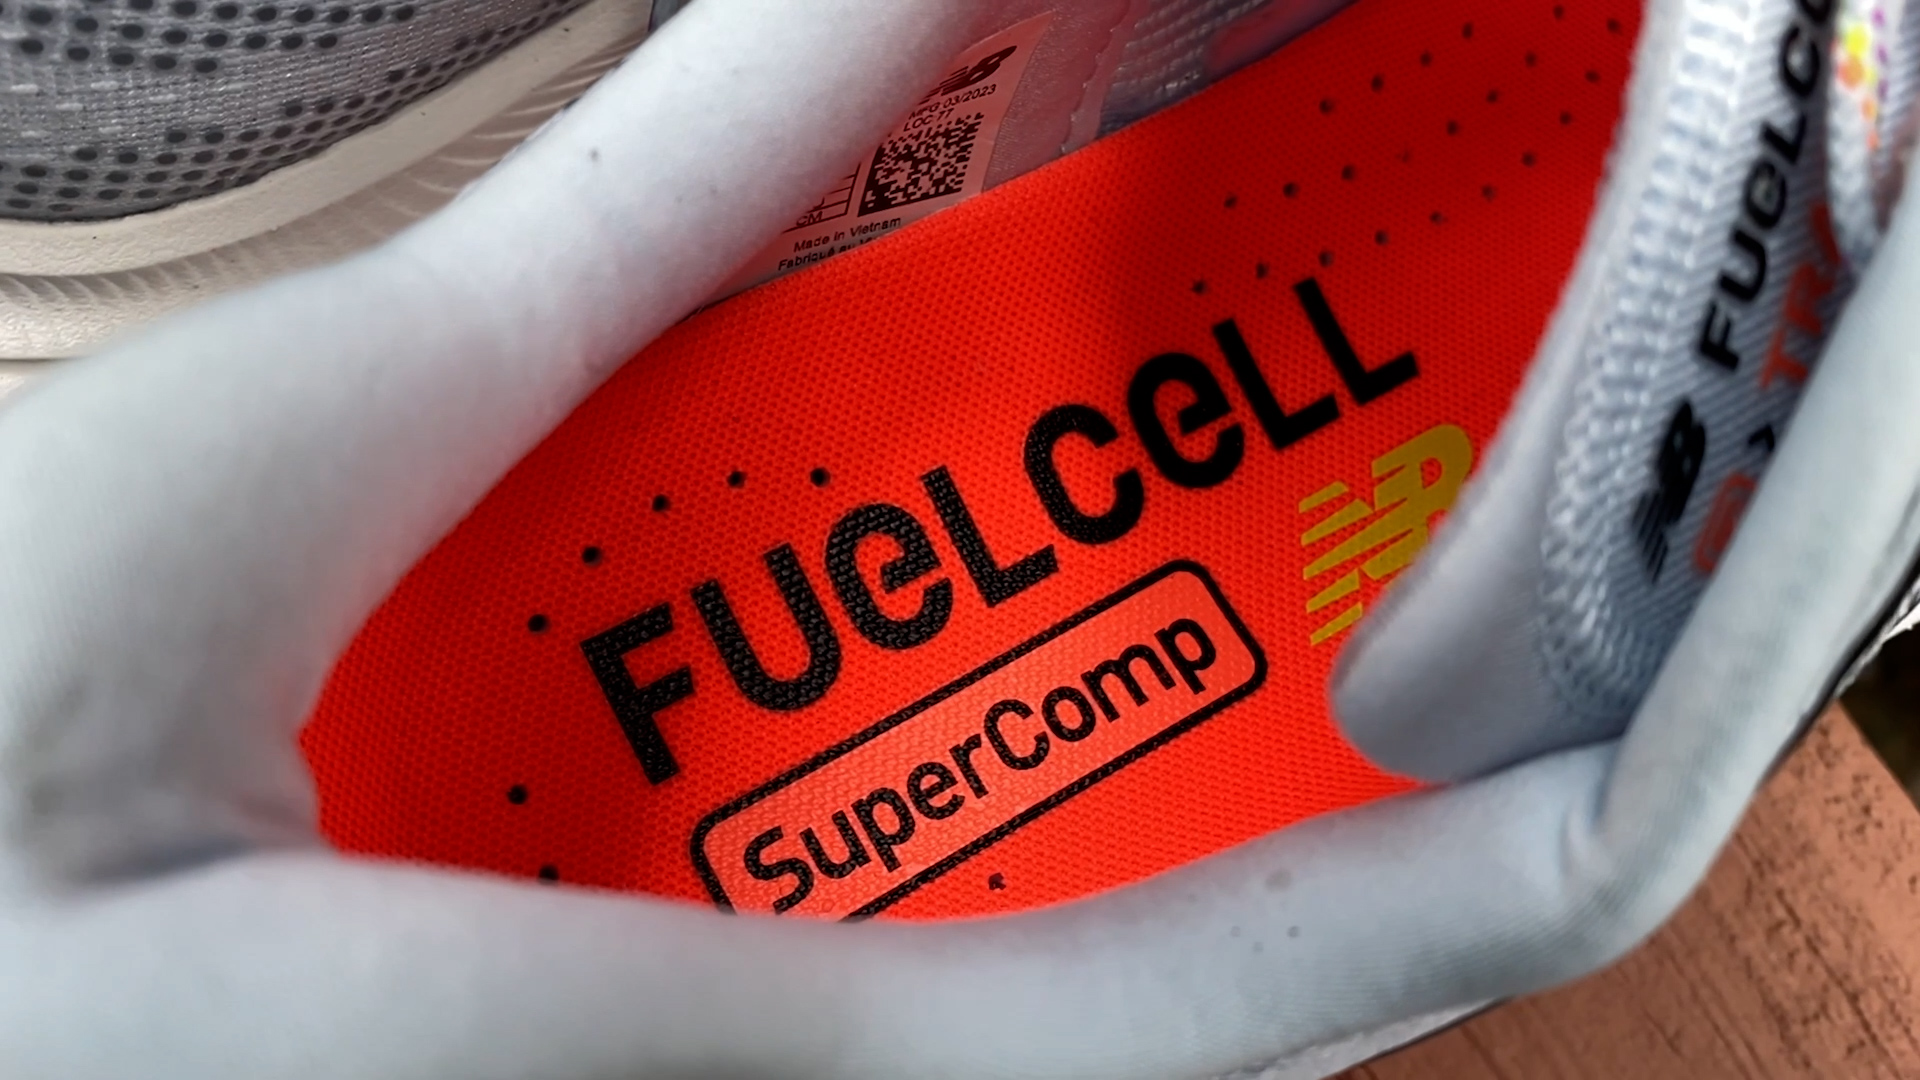 New Balance Fuel Cell Supercomp Trainer V2: A Comprehensive Review